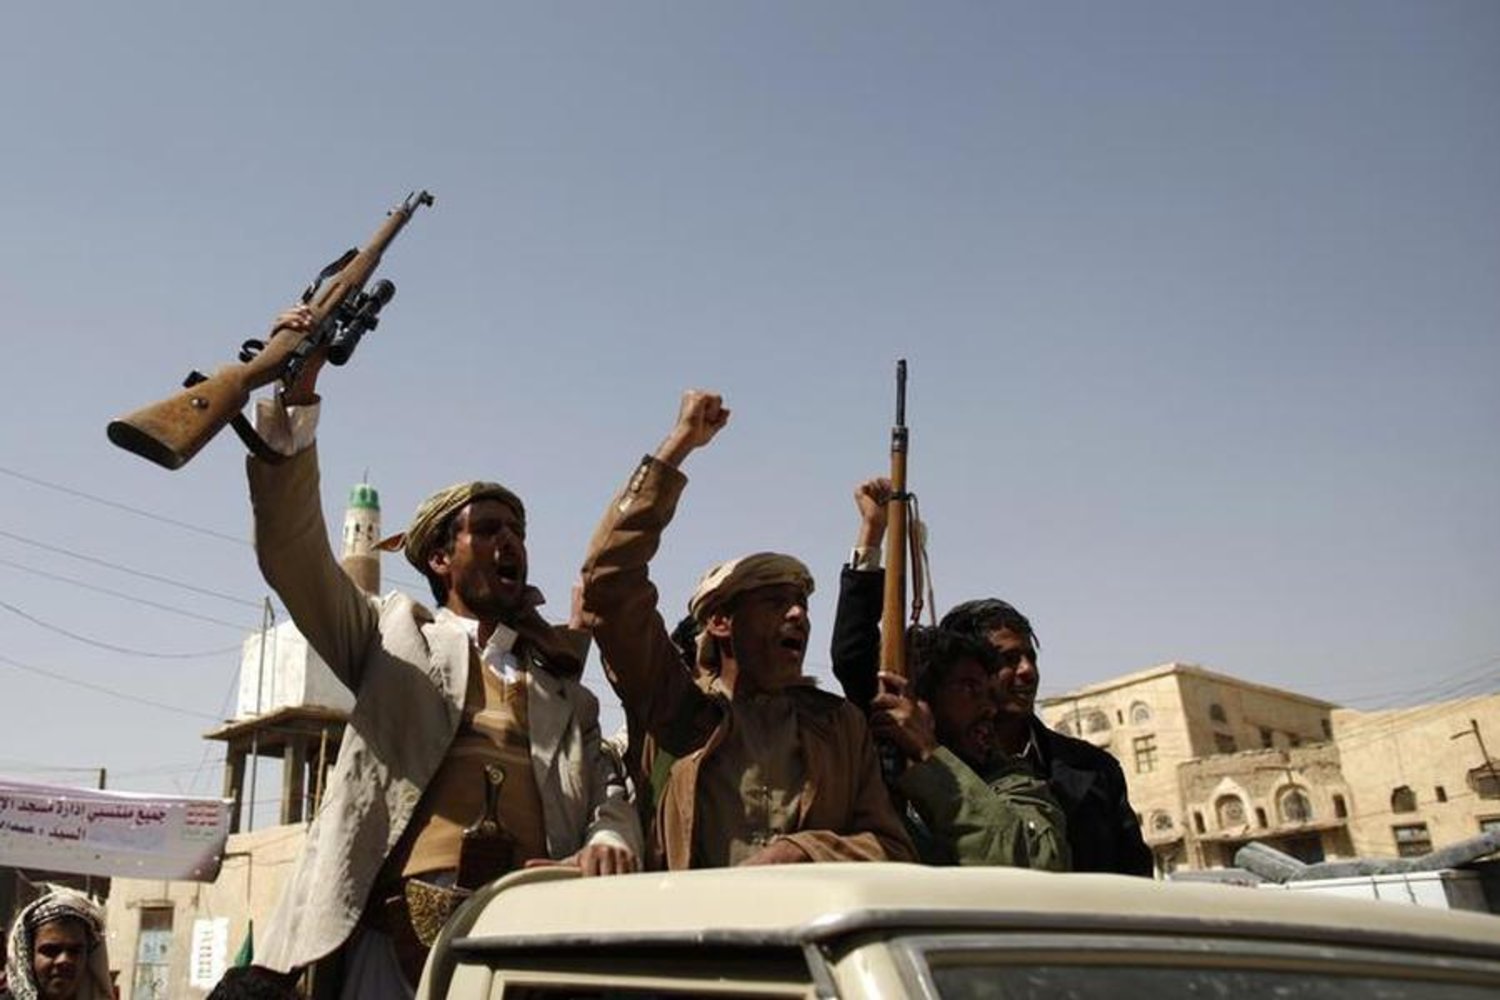 Houthi militants shout slogans as they ride a pick-up truck in the northwestern Yemeni city of Saada. Reuters